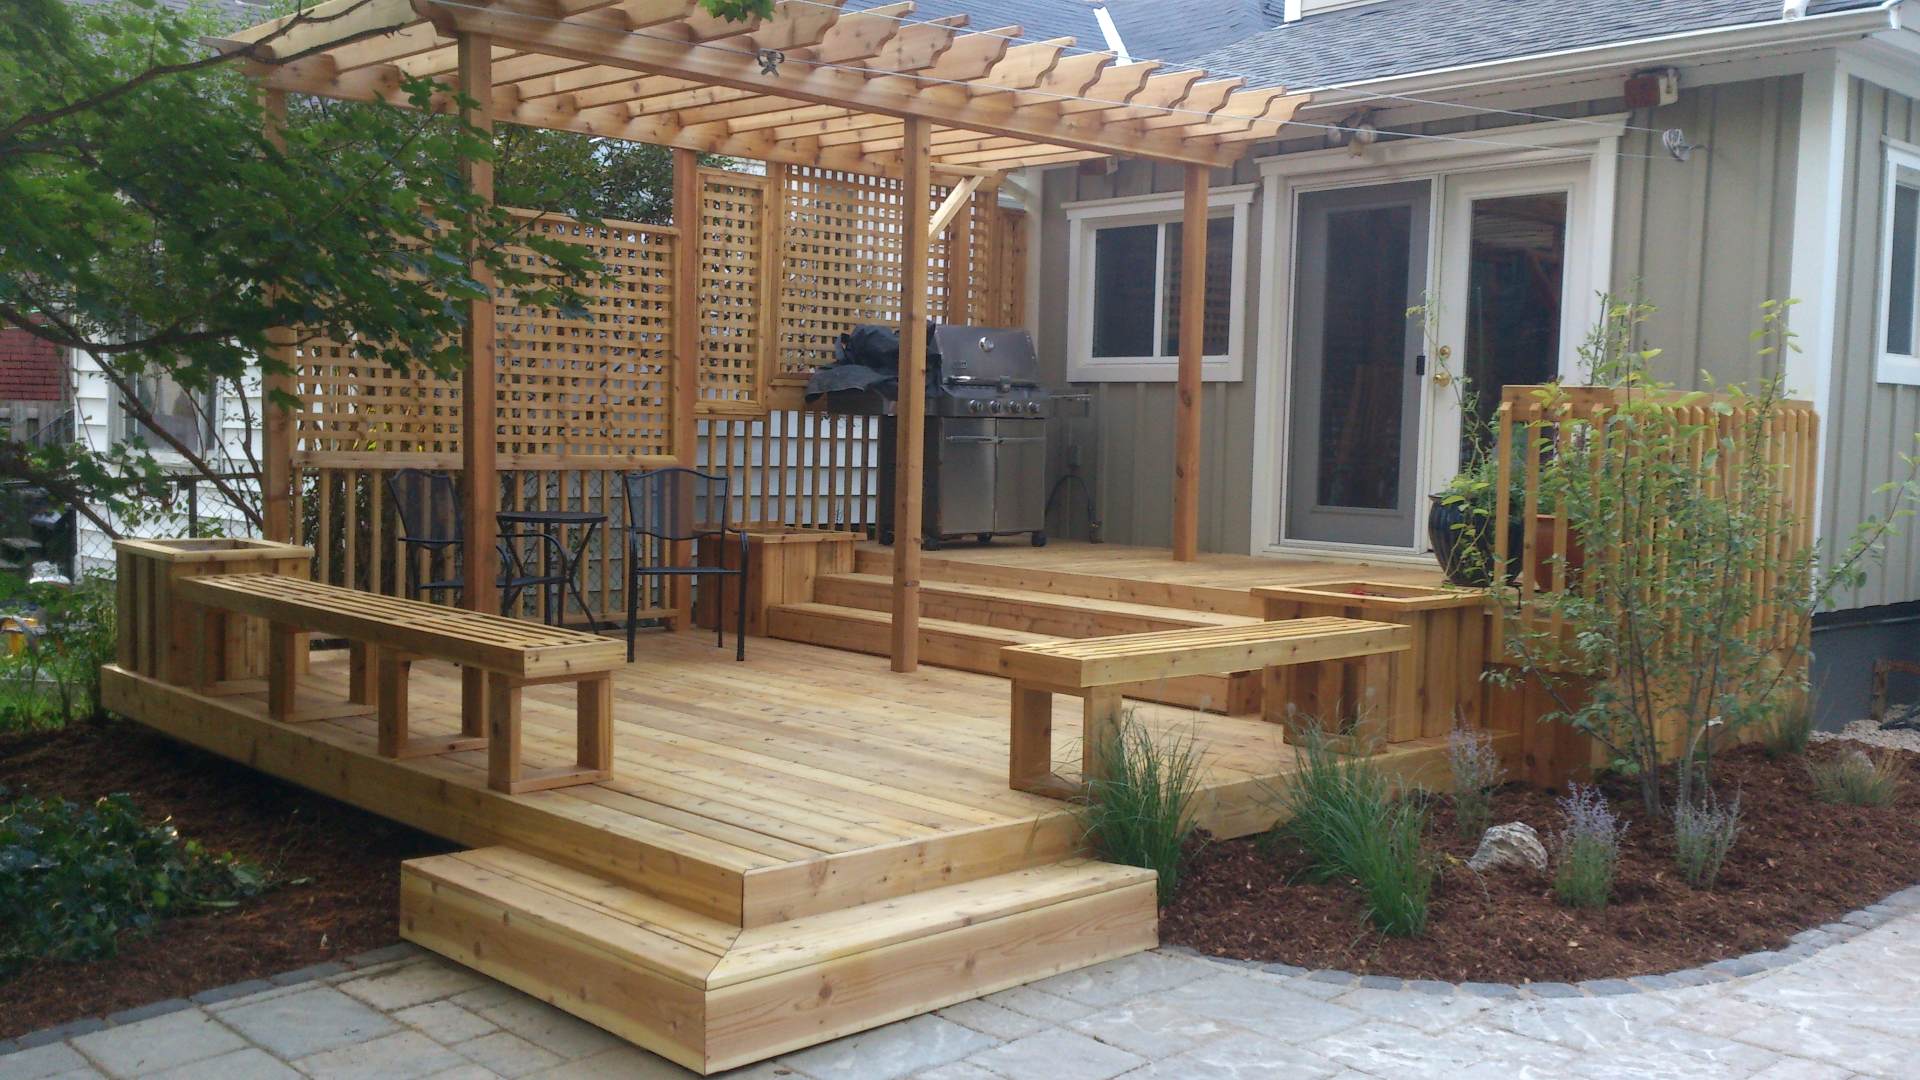 New deck and backyard renovation: a landscaping, hardscaping and woodwork project in London Ontario.